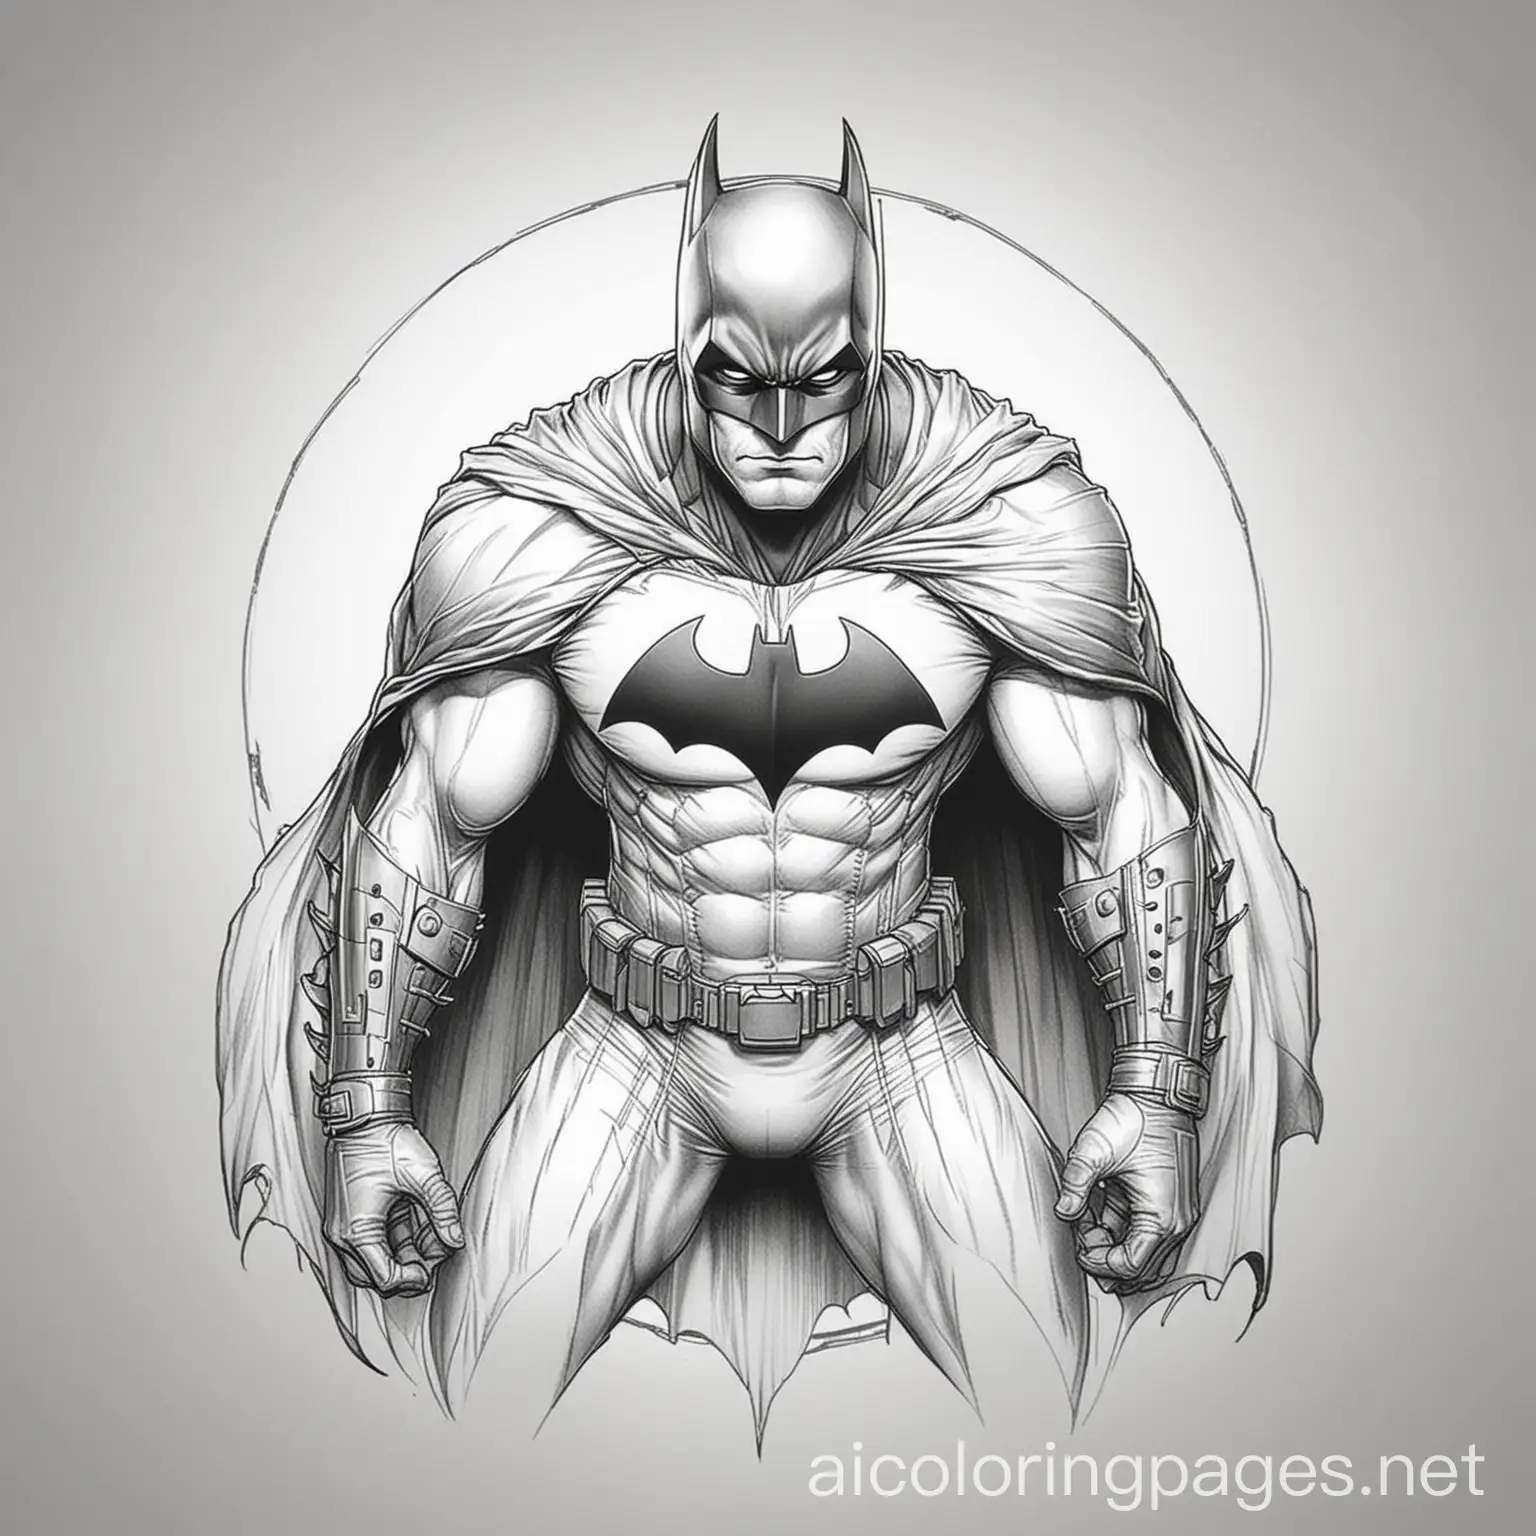 batman, Coloring Page, black and white, line art, white background, Simplicity, Ample White Space. The background of the coloring page is plain white to make it easy for young children to color within the lines. The outlines of all the subjects are easy to distinguish, making it simple for kids to color without too much difficulty